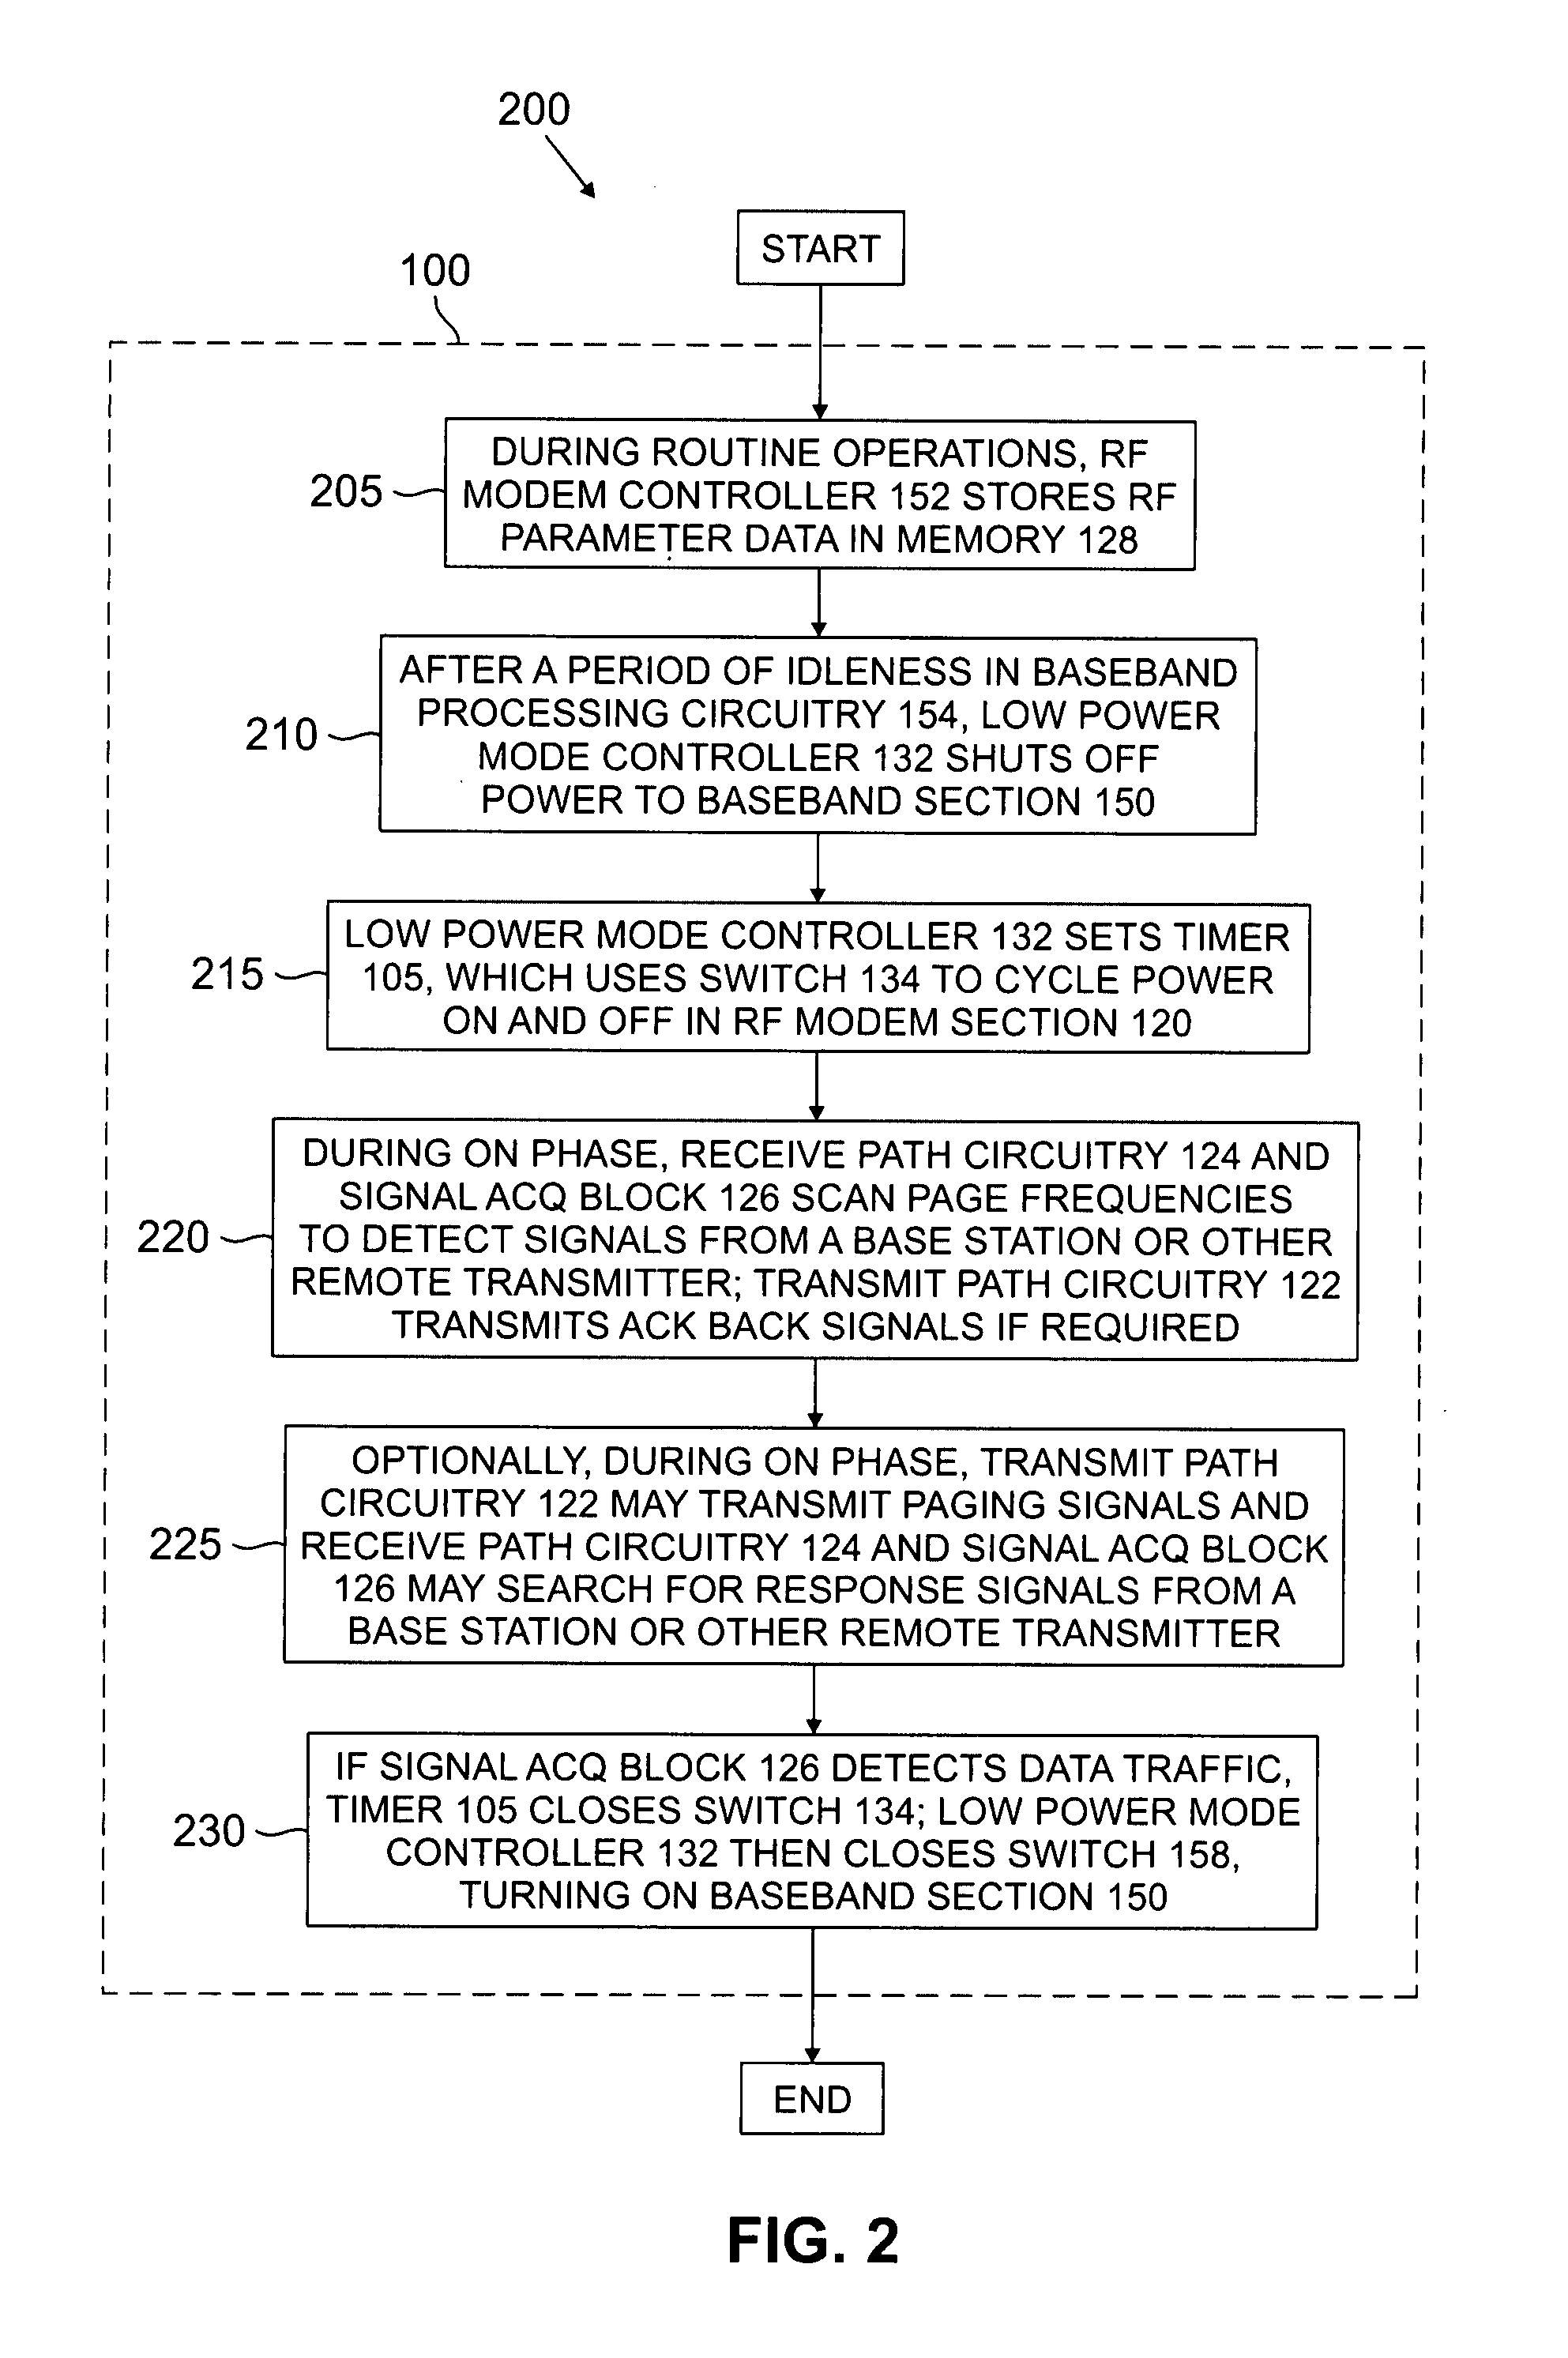 Apparatus and method for reducing power consumption in wireless RF systems